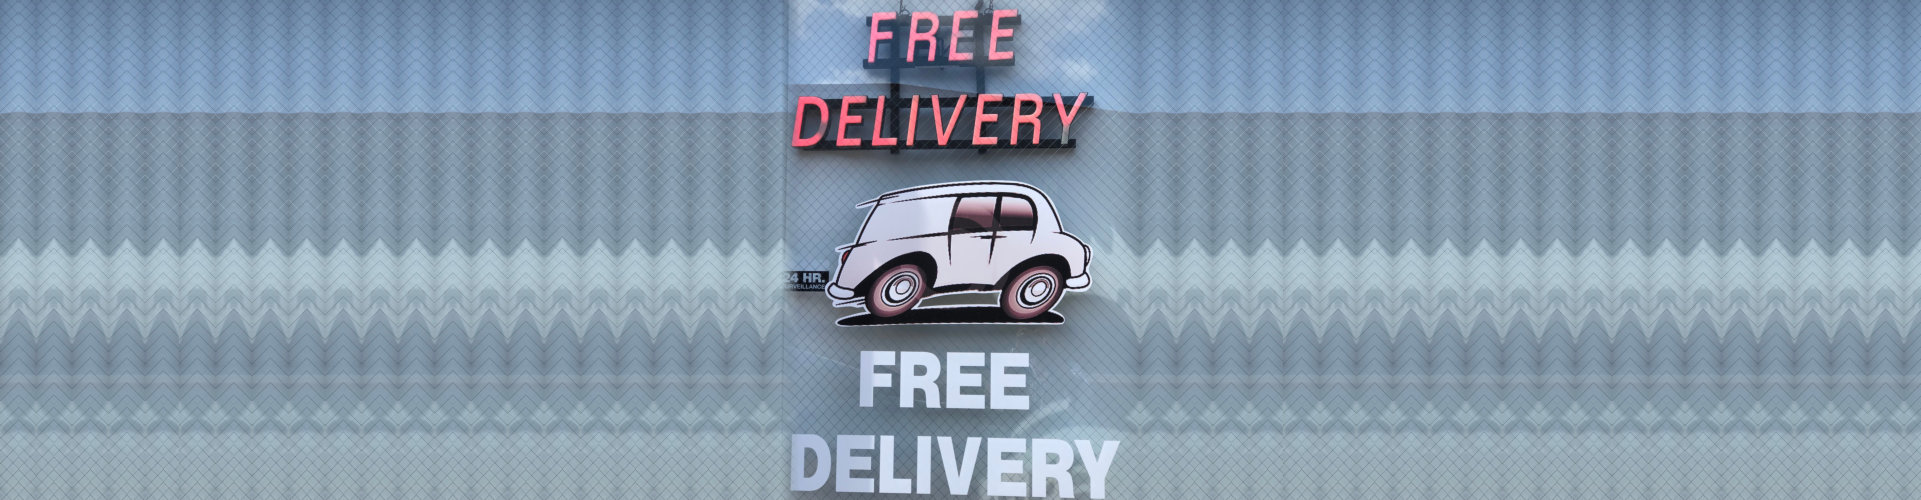 free delivery poster